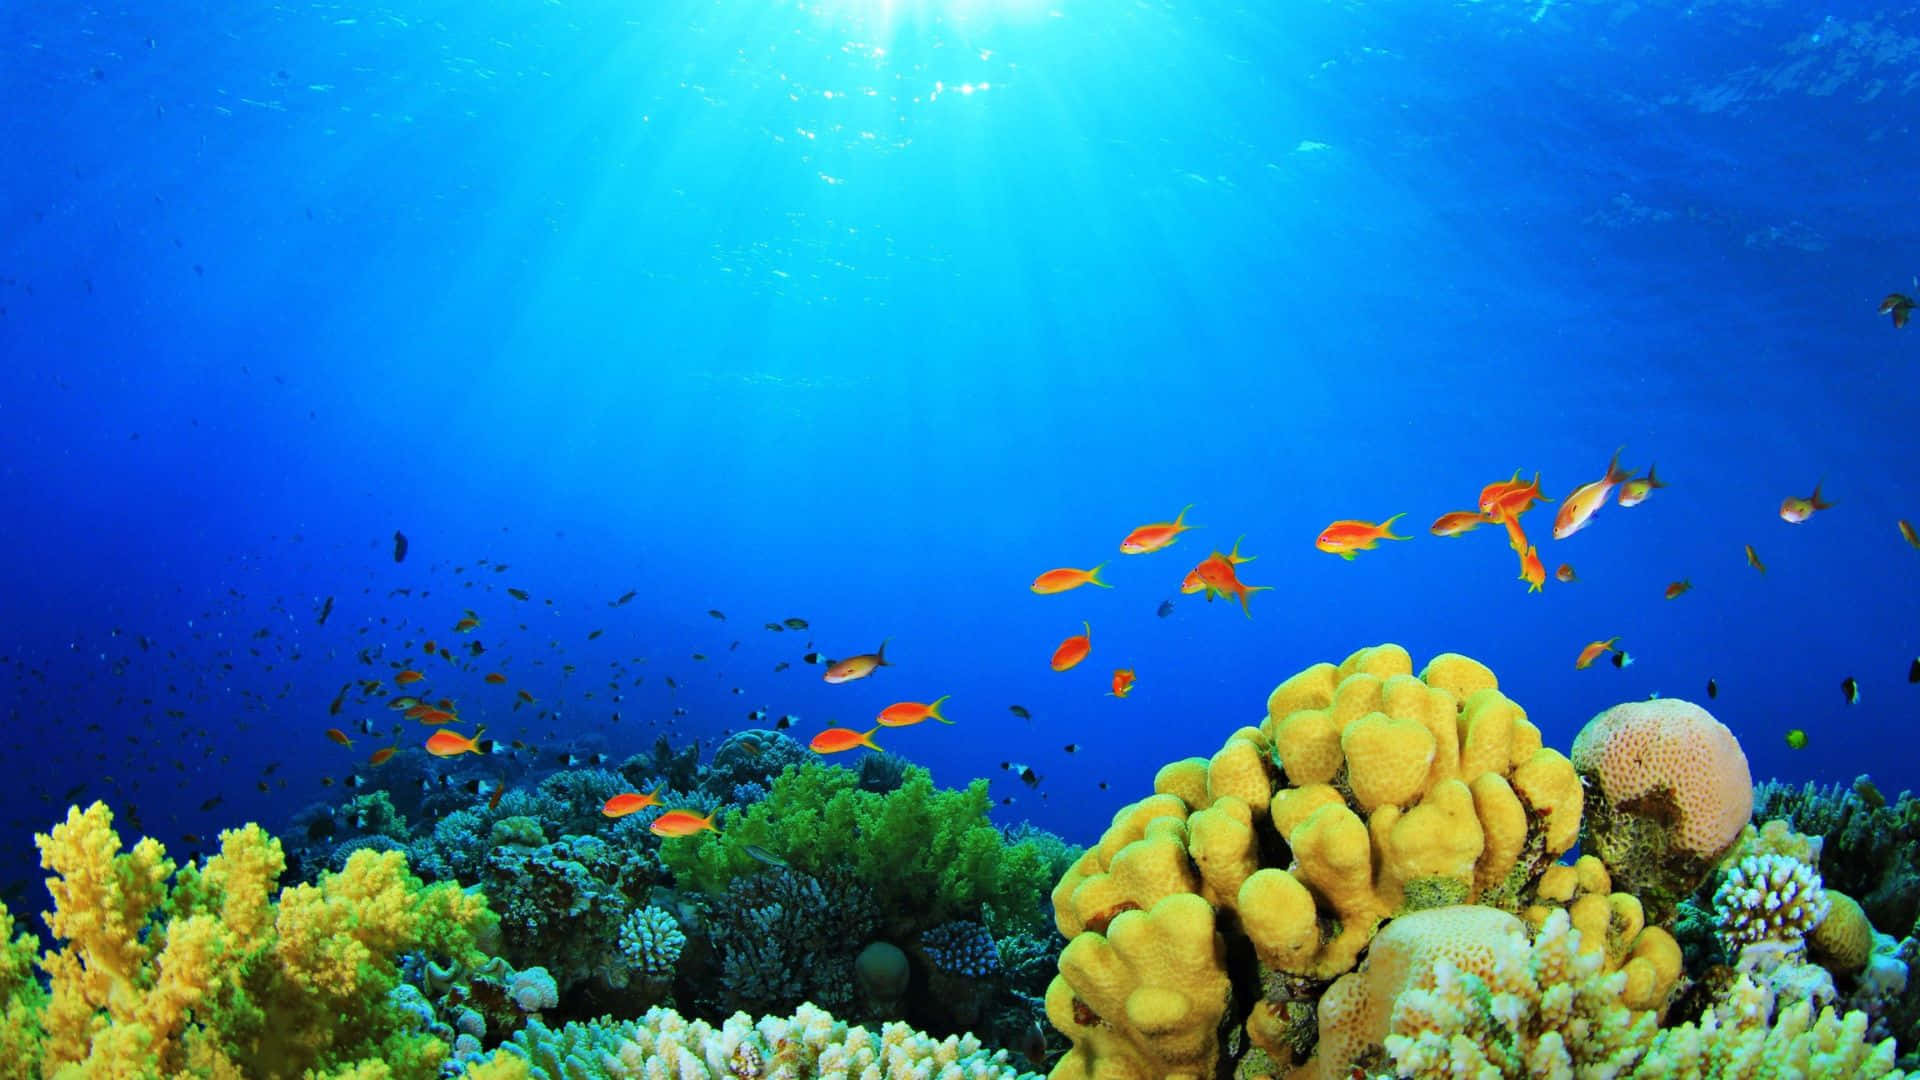 A Coral Reef With Fish Swimming In The Water